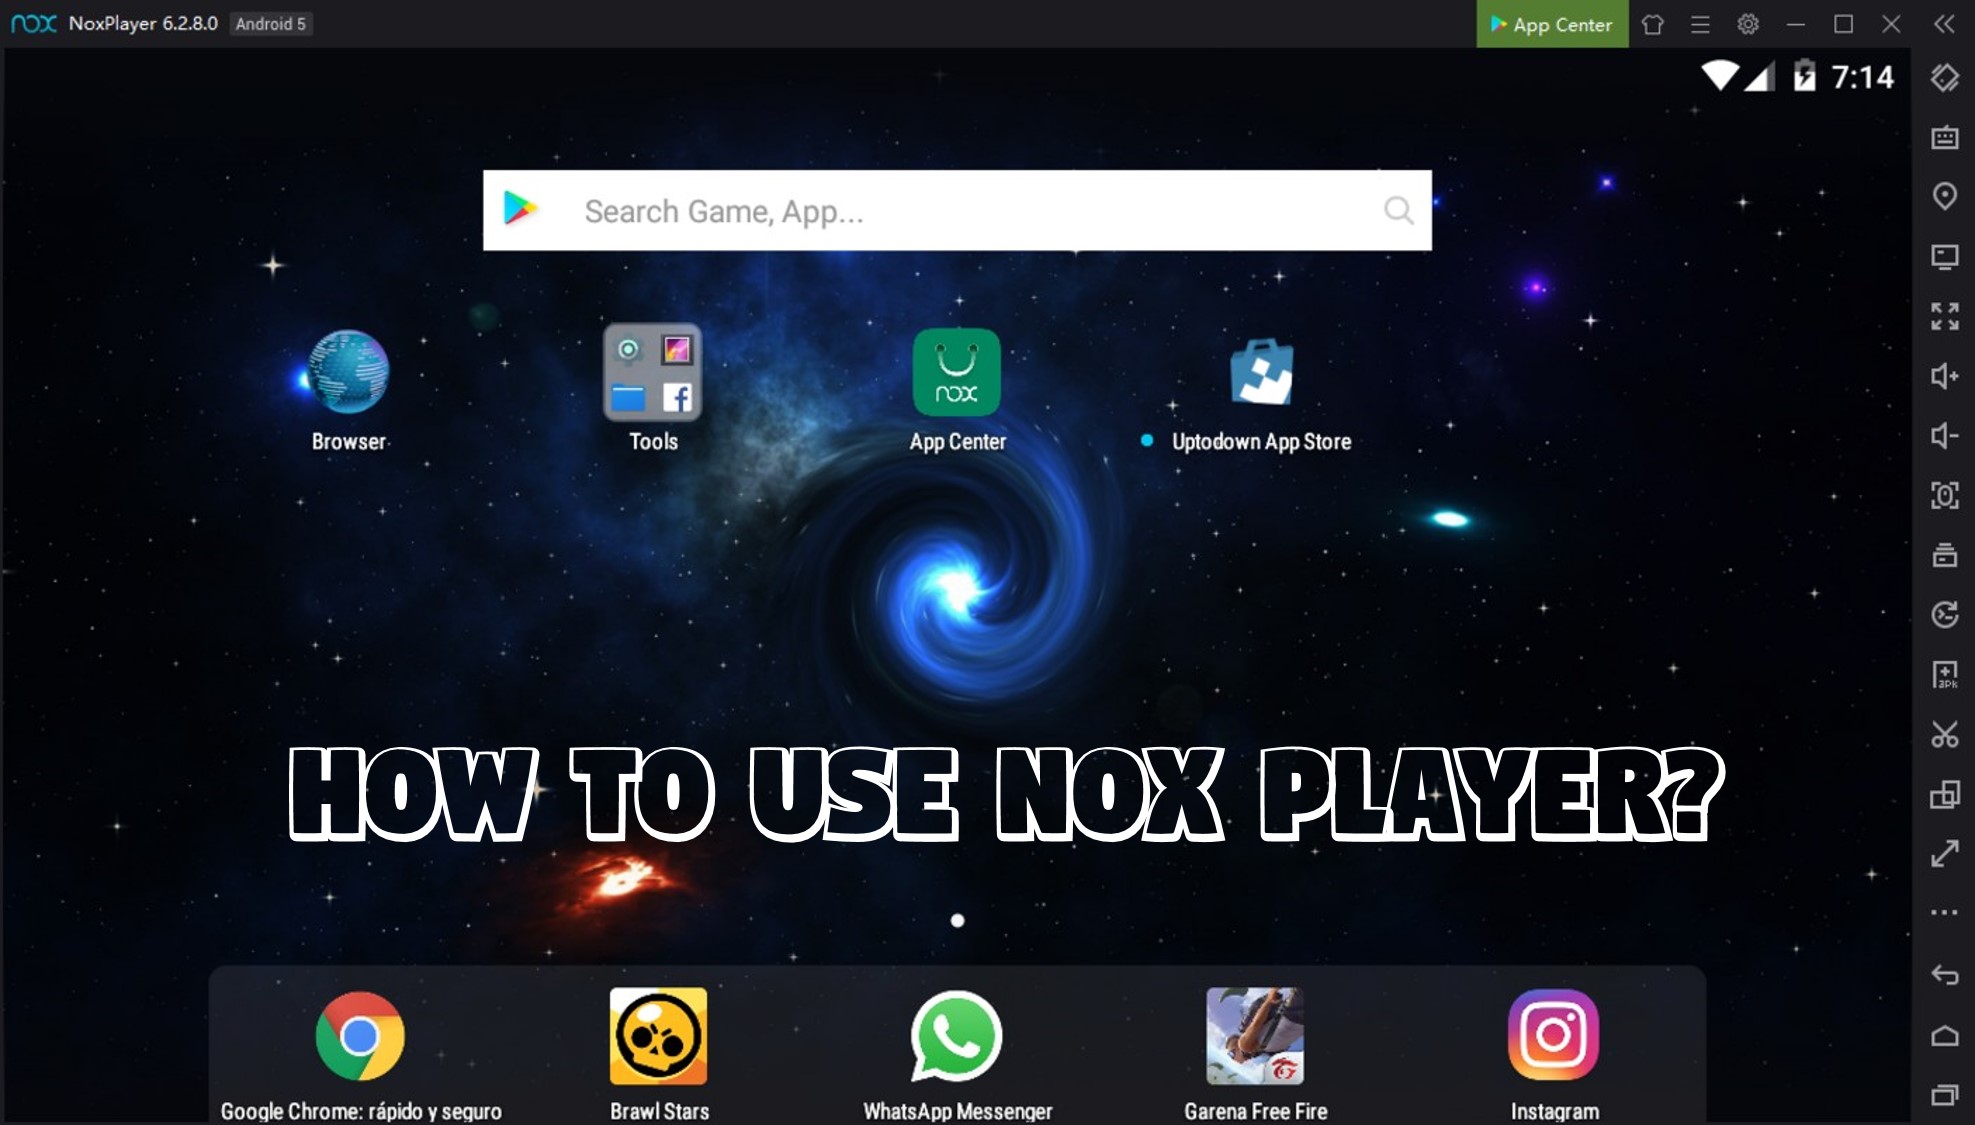 How to use Nox player Correctly [Full Tutorial]